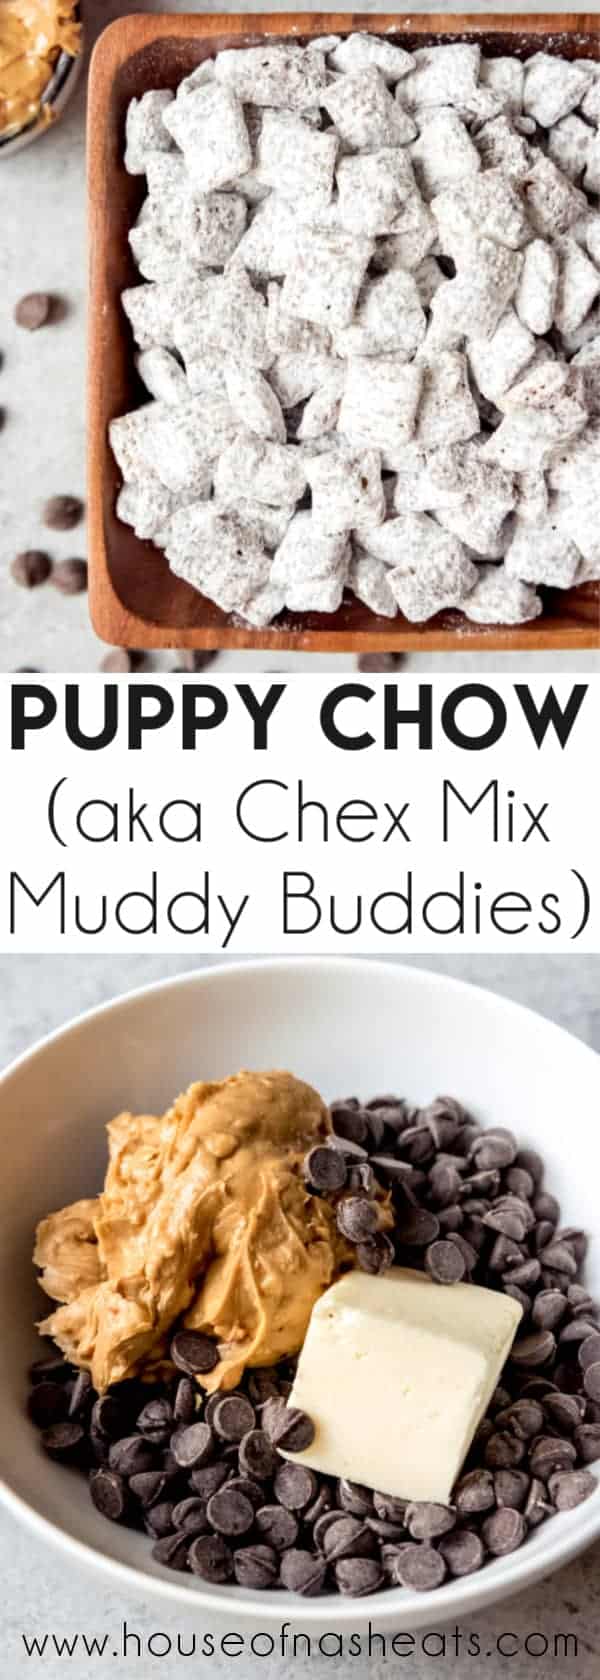 An image of puppy chow and a bowl with puppy chow ingredients.